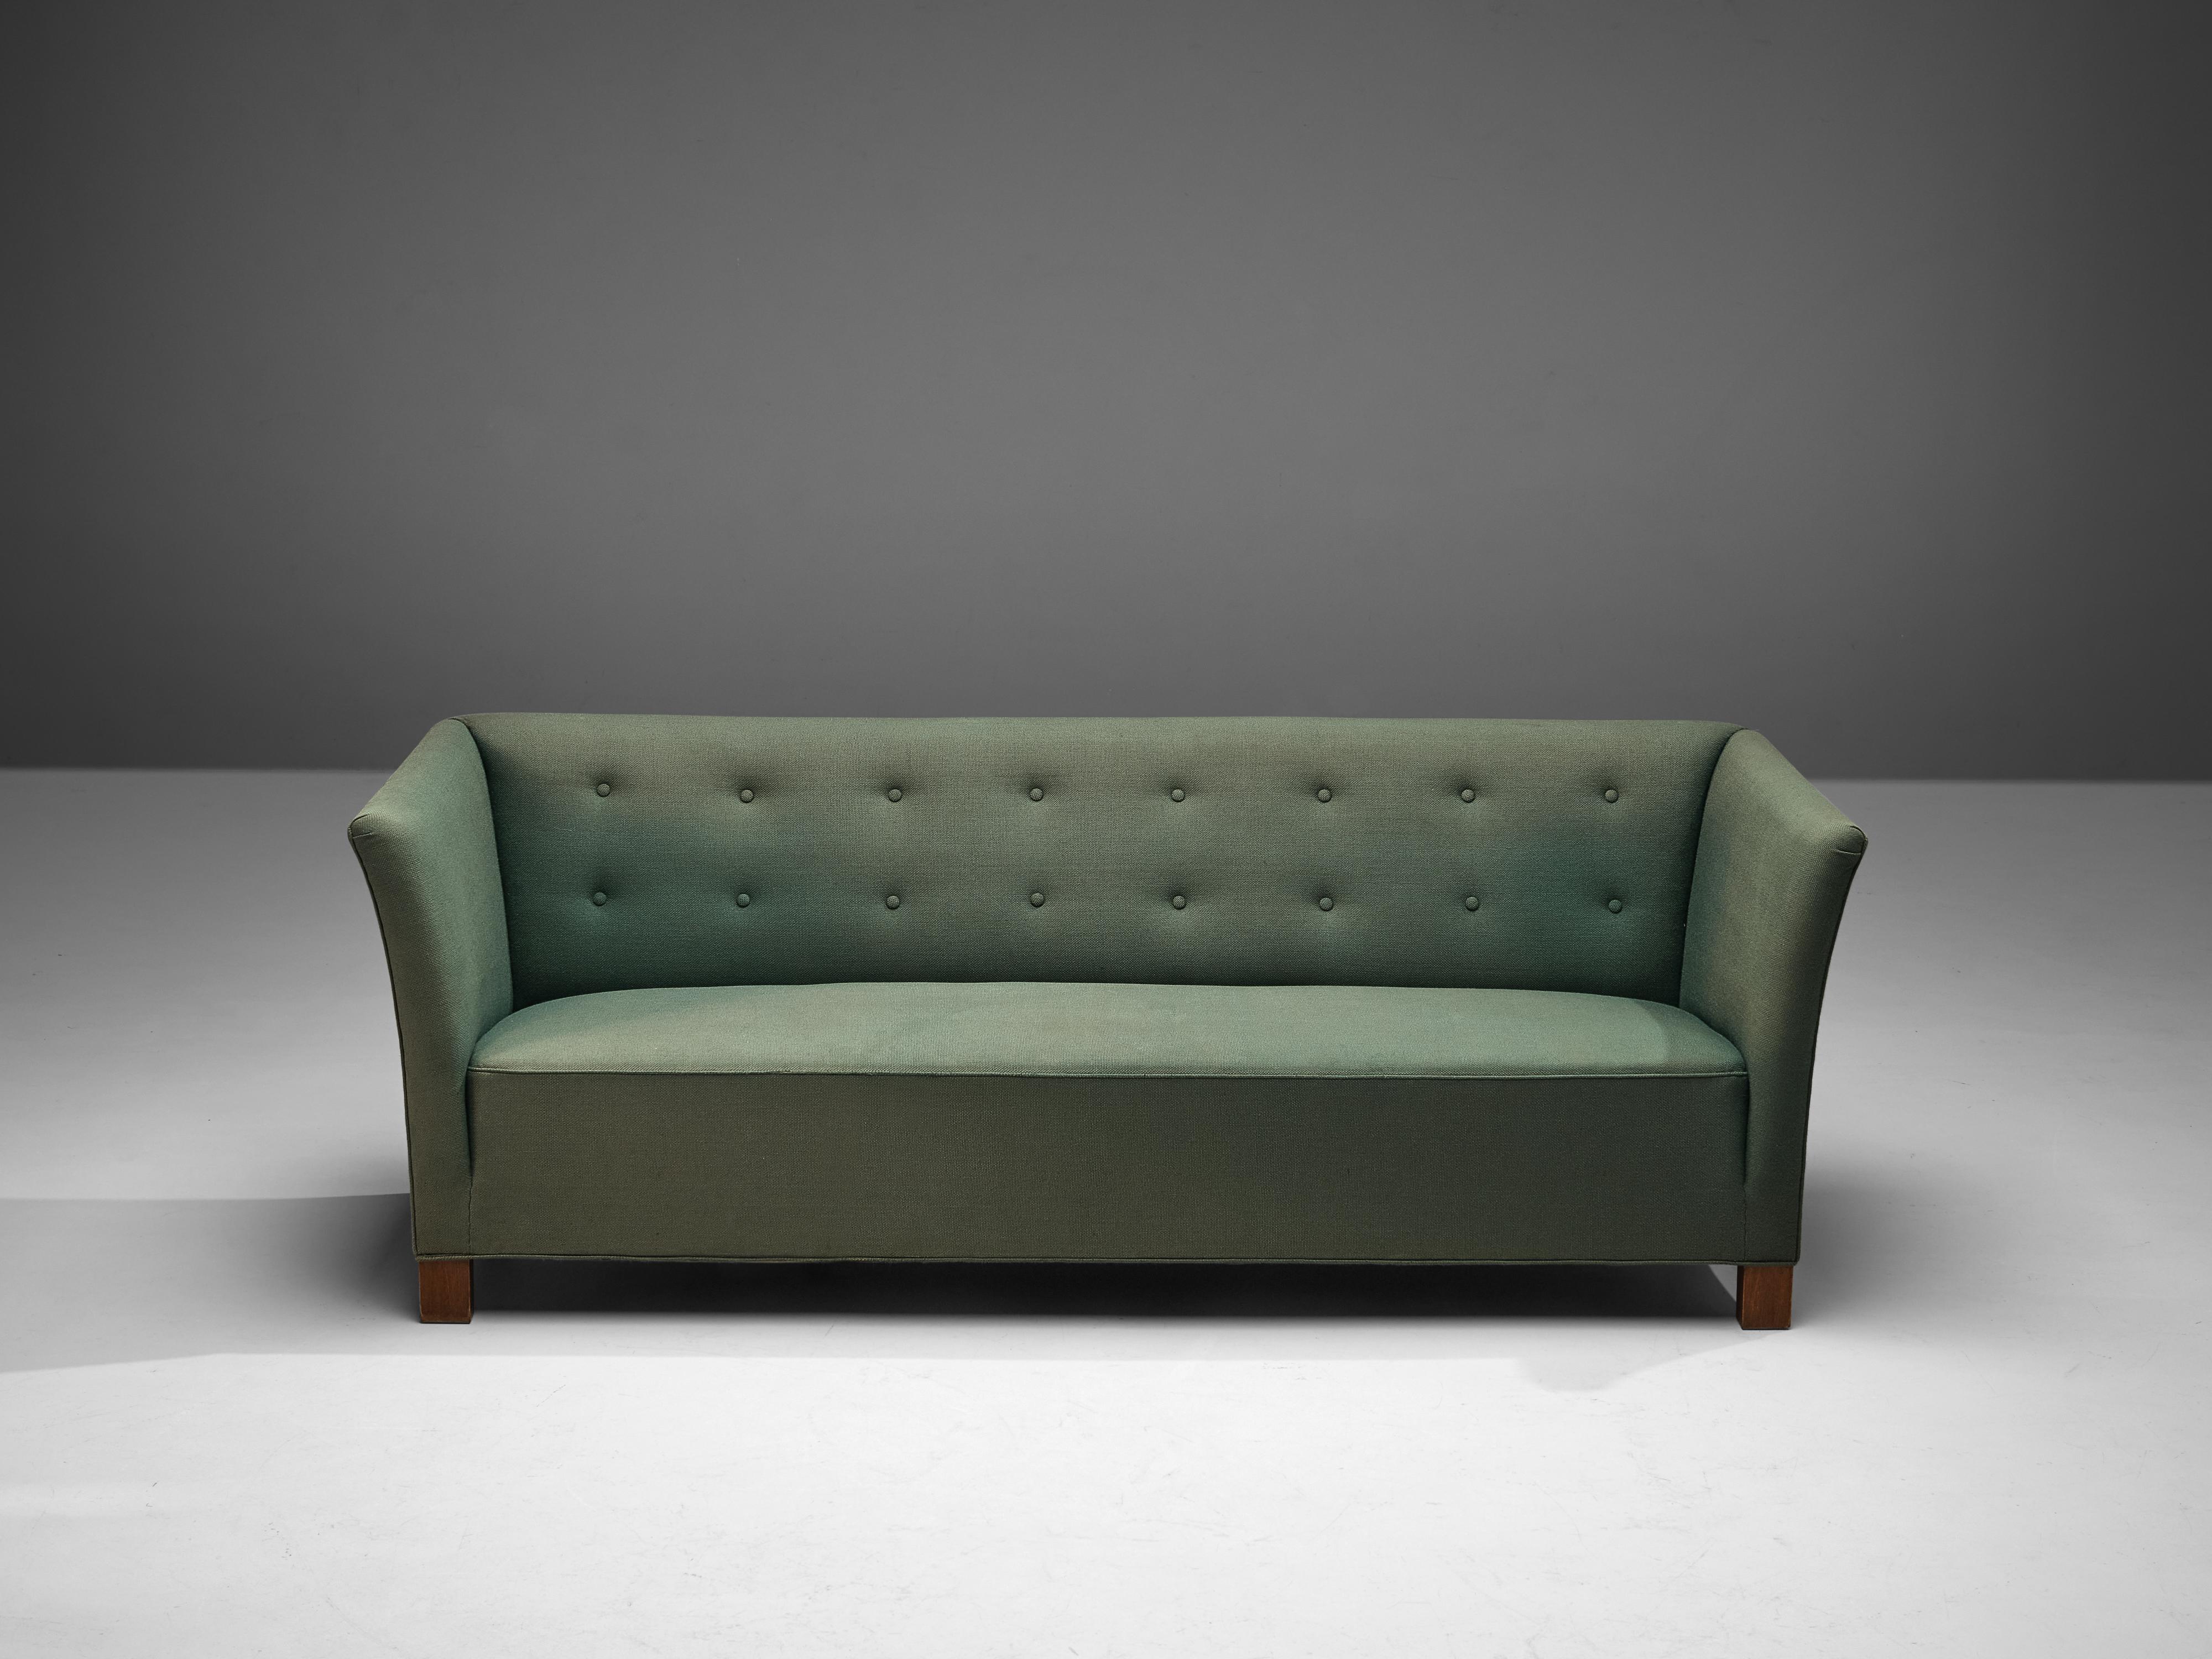 Three-seat sofa, velvet and wood, Denmark, 1940s

This comfortable sofa has a sturdy appearance, with elegant armrests that are slightly curved. This graceful look is emphasized by the decorative cushions and the sleek overall look. The sofa is